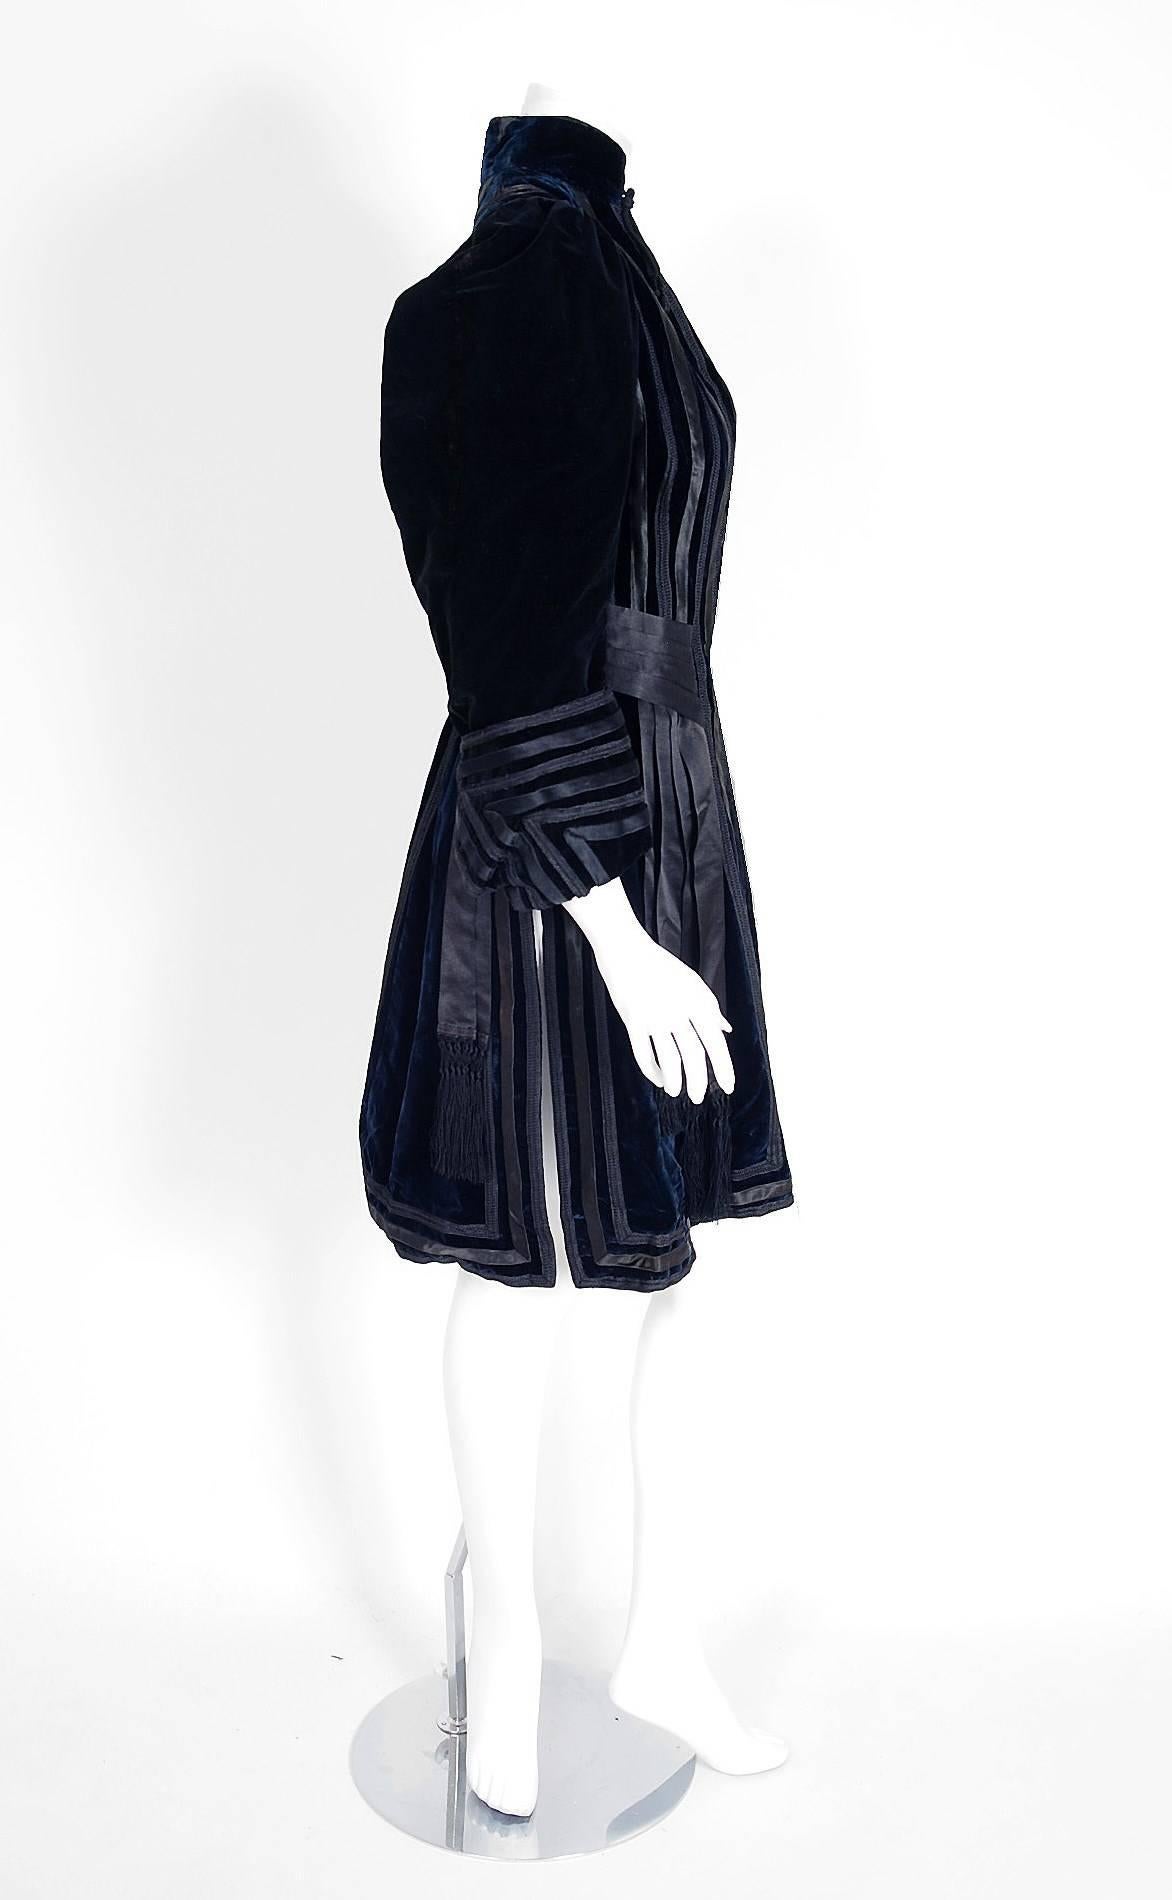 This sensational custom-made Edwardian Couture princess coat is lavishly embellished with stripes of black silk-satin throughout. The highly stylized applique work perfectly captures the Art Nouveau aesthetic. Rich midnight-blue velvet is the base